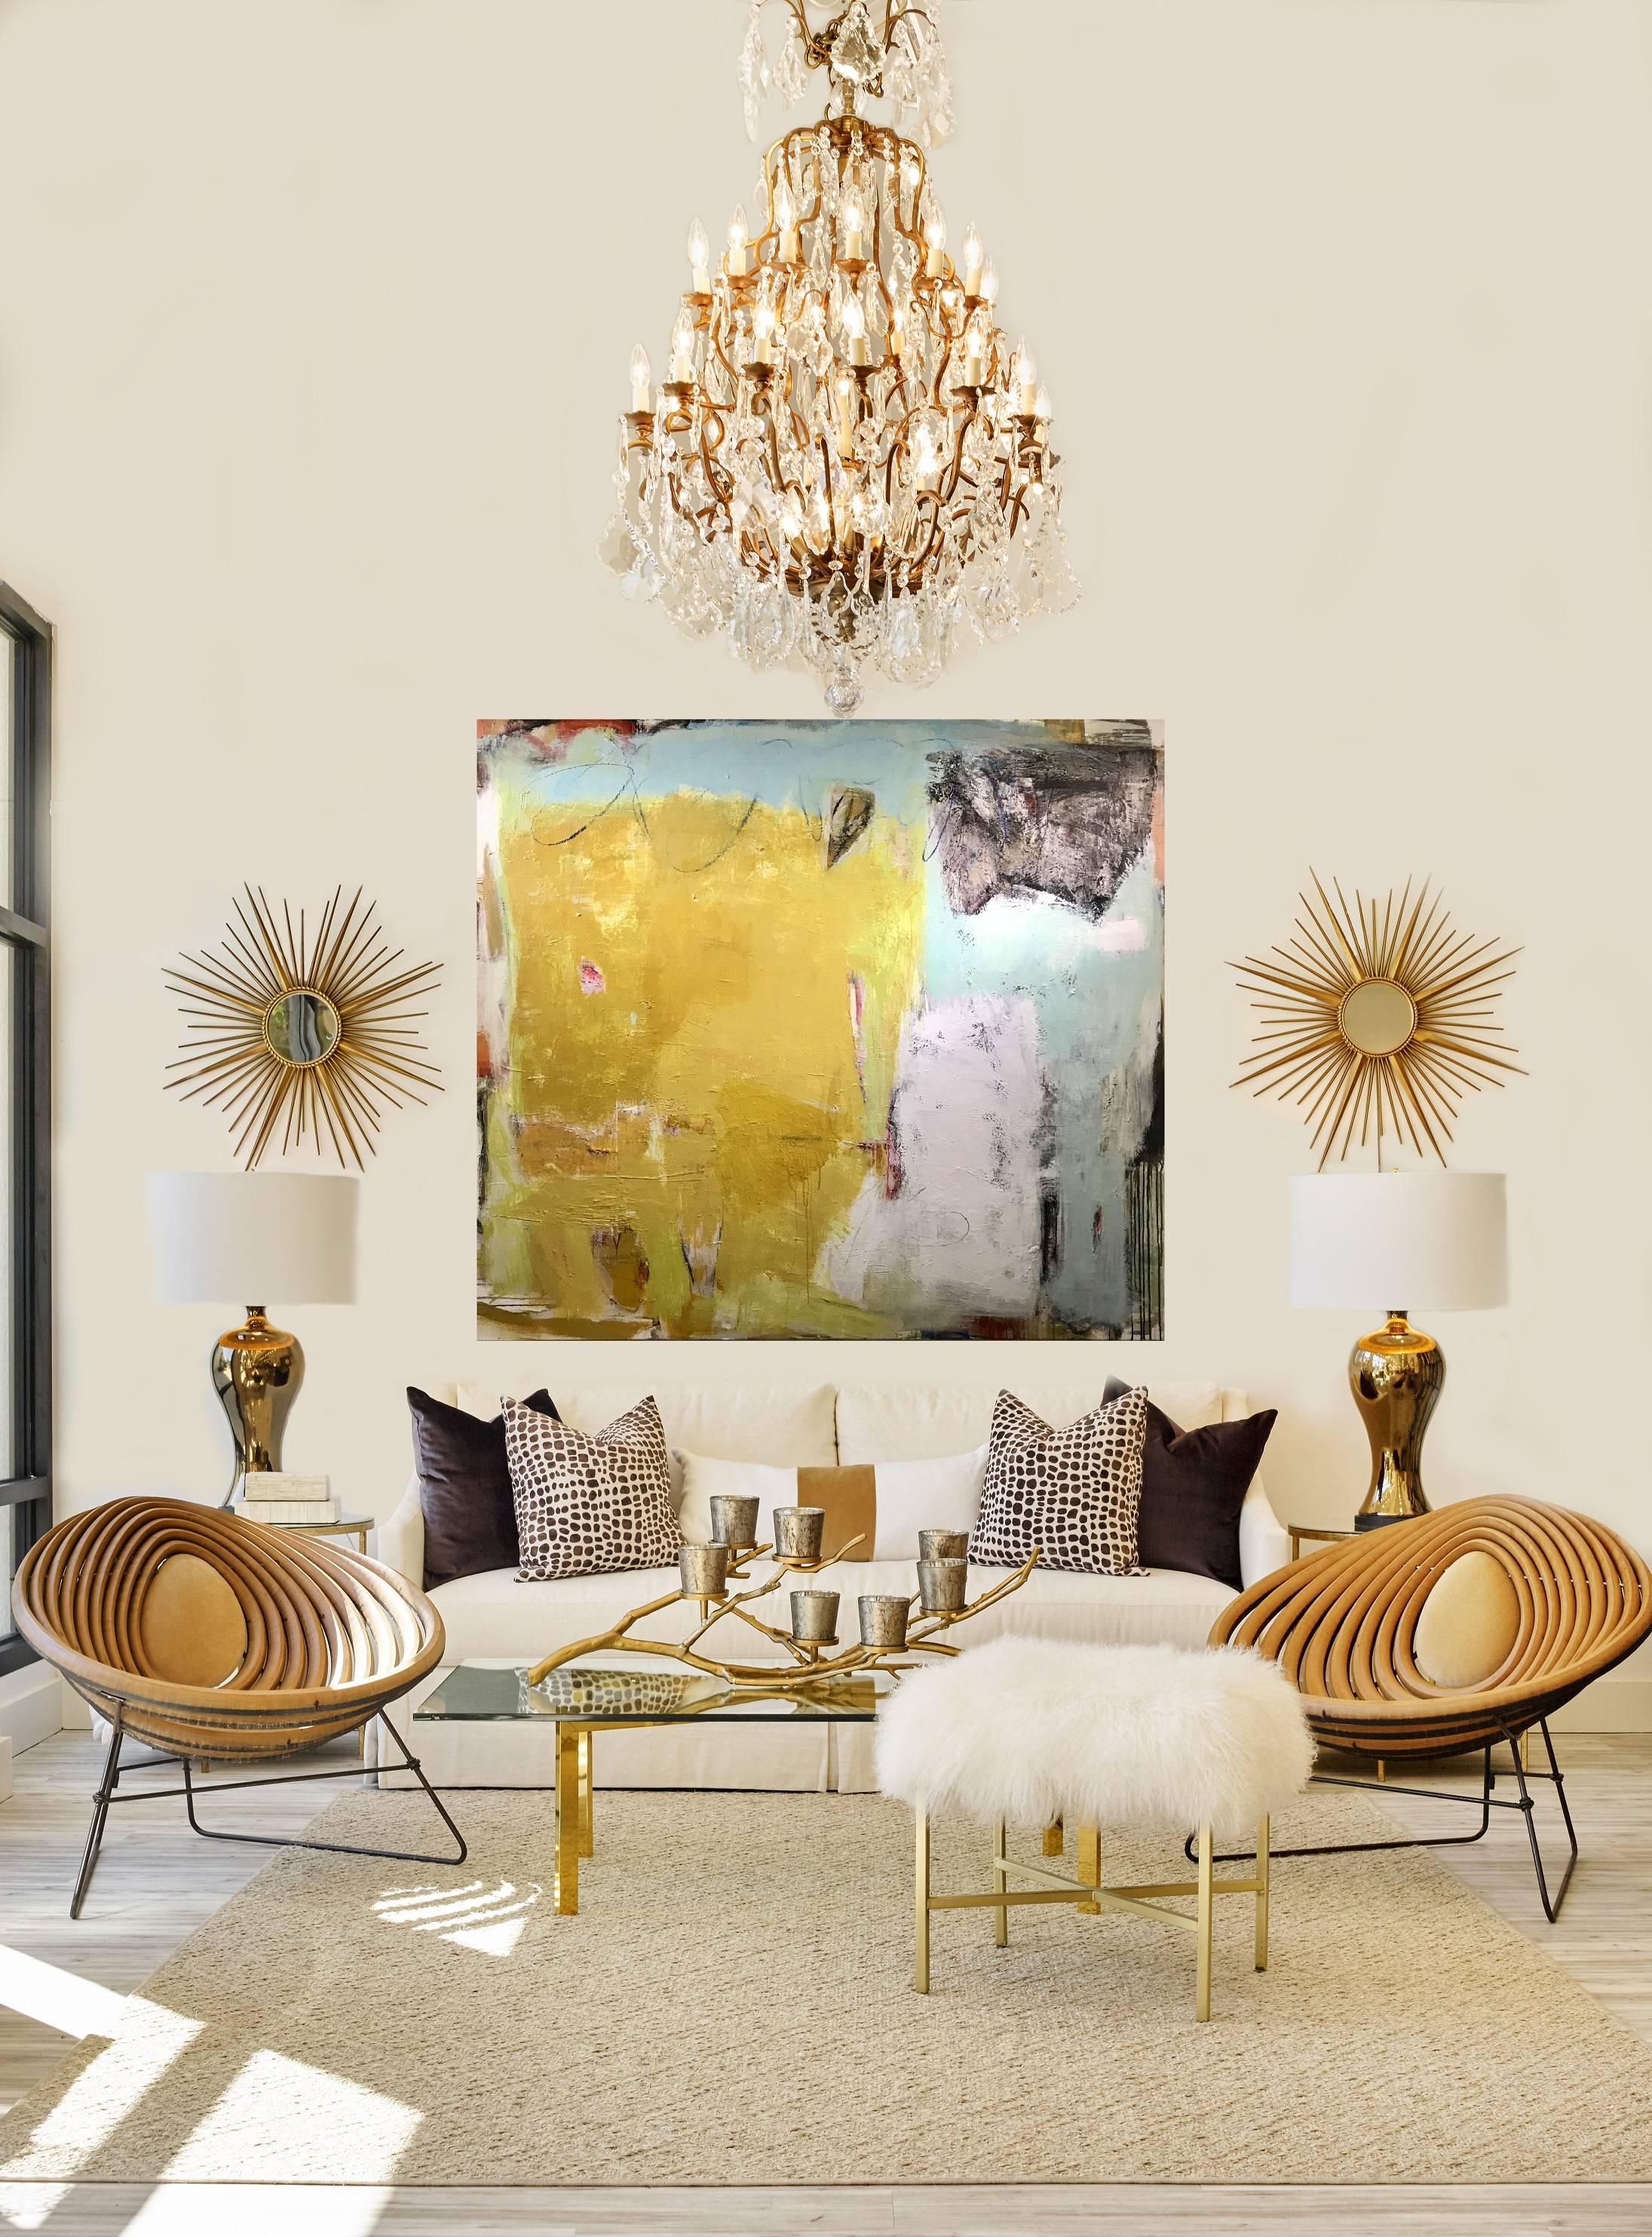 'Synergy' is a large contemporary abstract acrylic and mixed media on canvas painting created by American artist Ellen Rolli in 2018. Painted in a square format, this piece features an exquisite palette mostly made of warm yellow, juxtaposed with a